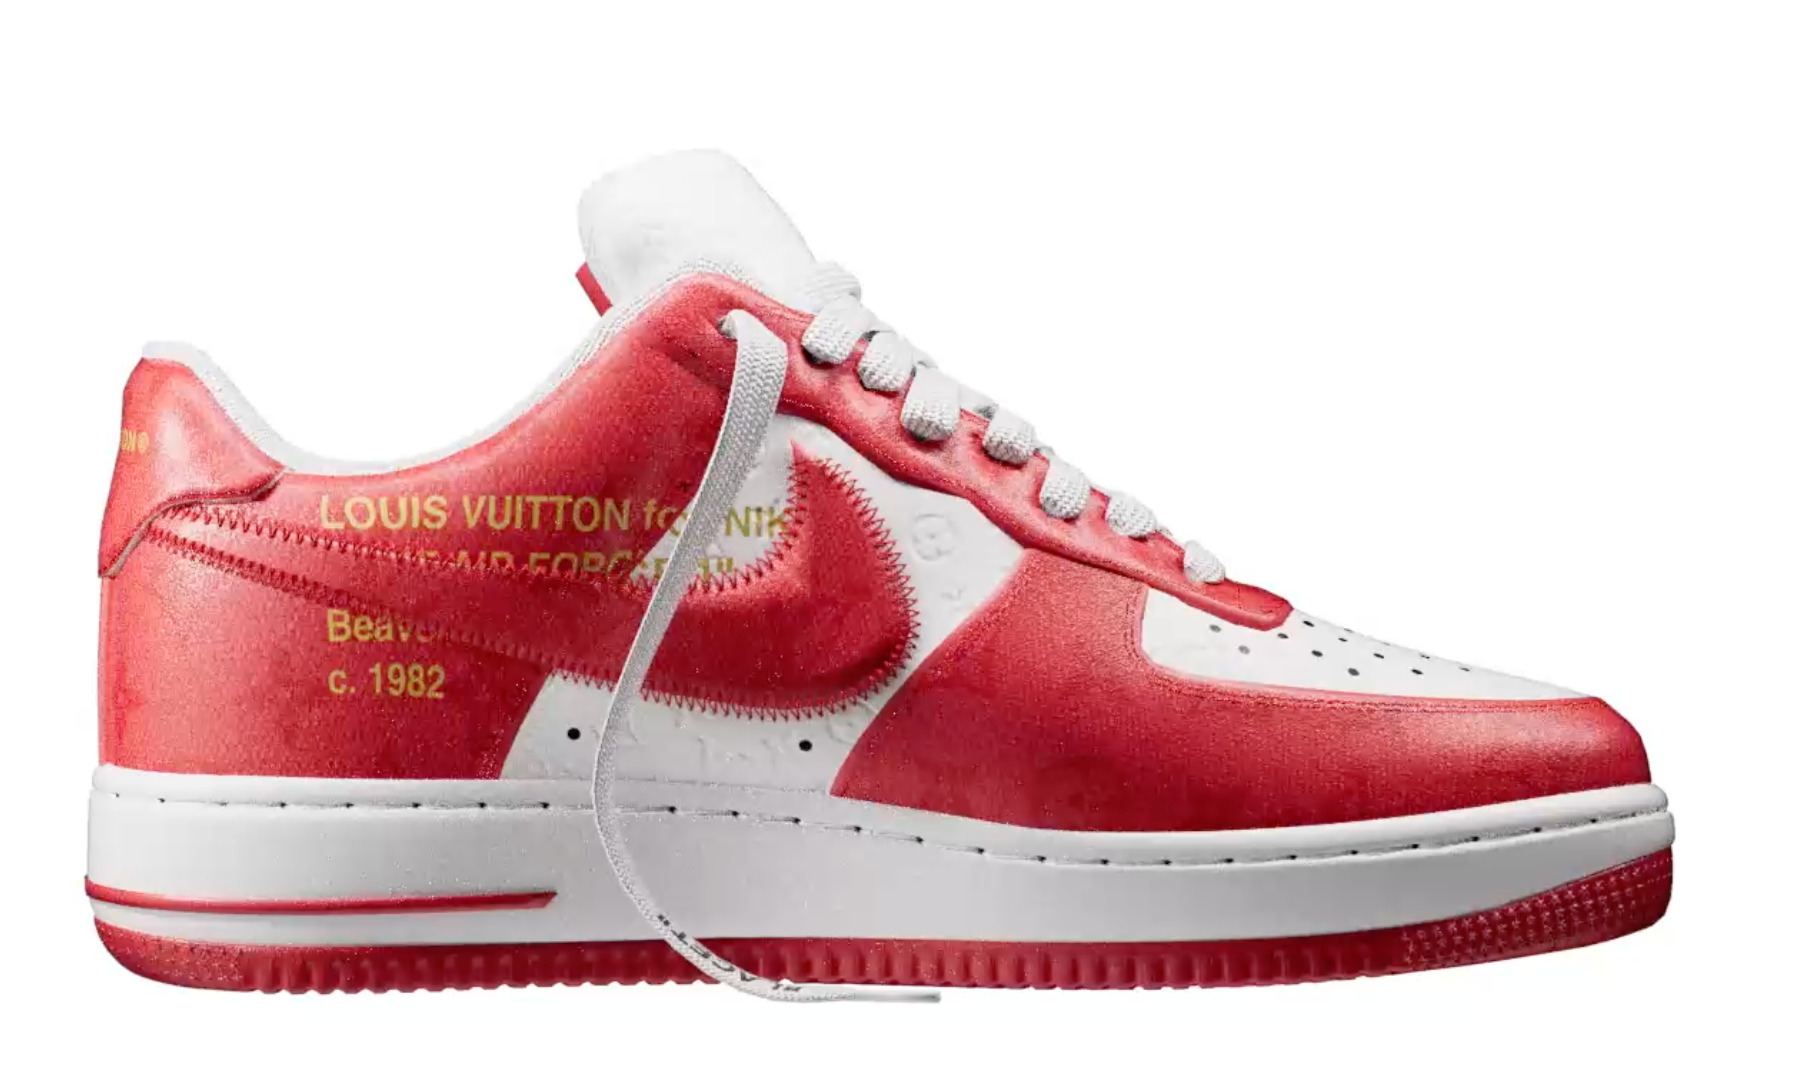 LOUIS VUITTON NIKE AIR FORCE 1 LOW WHITE RED